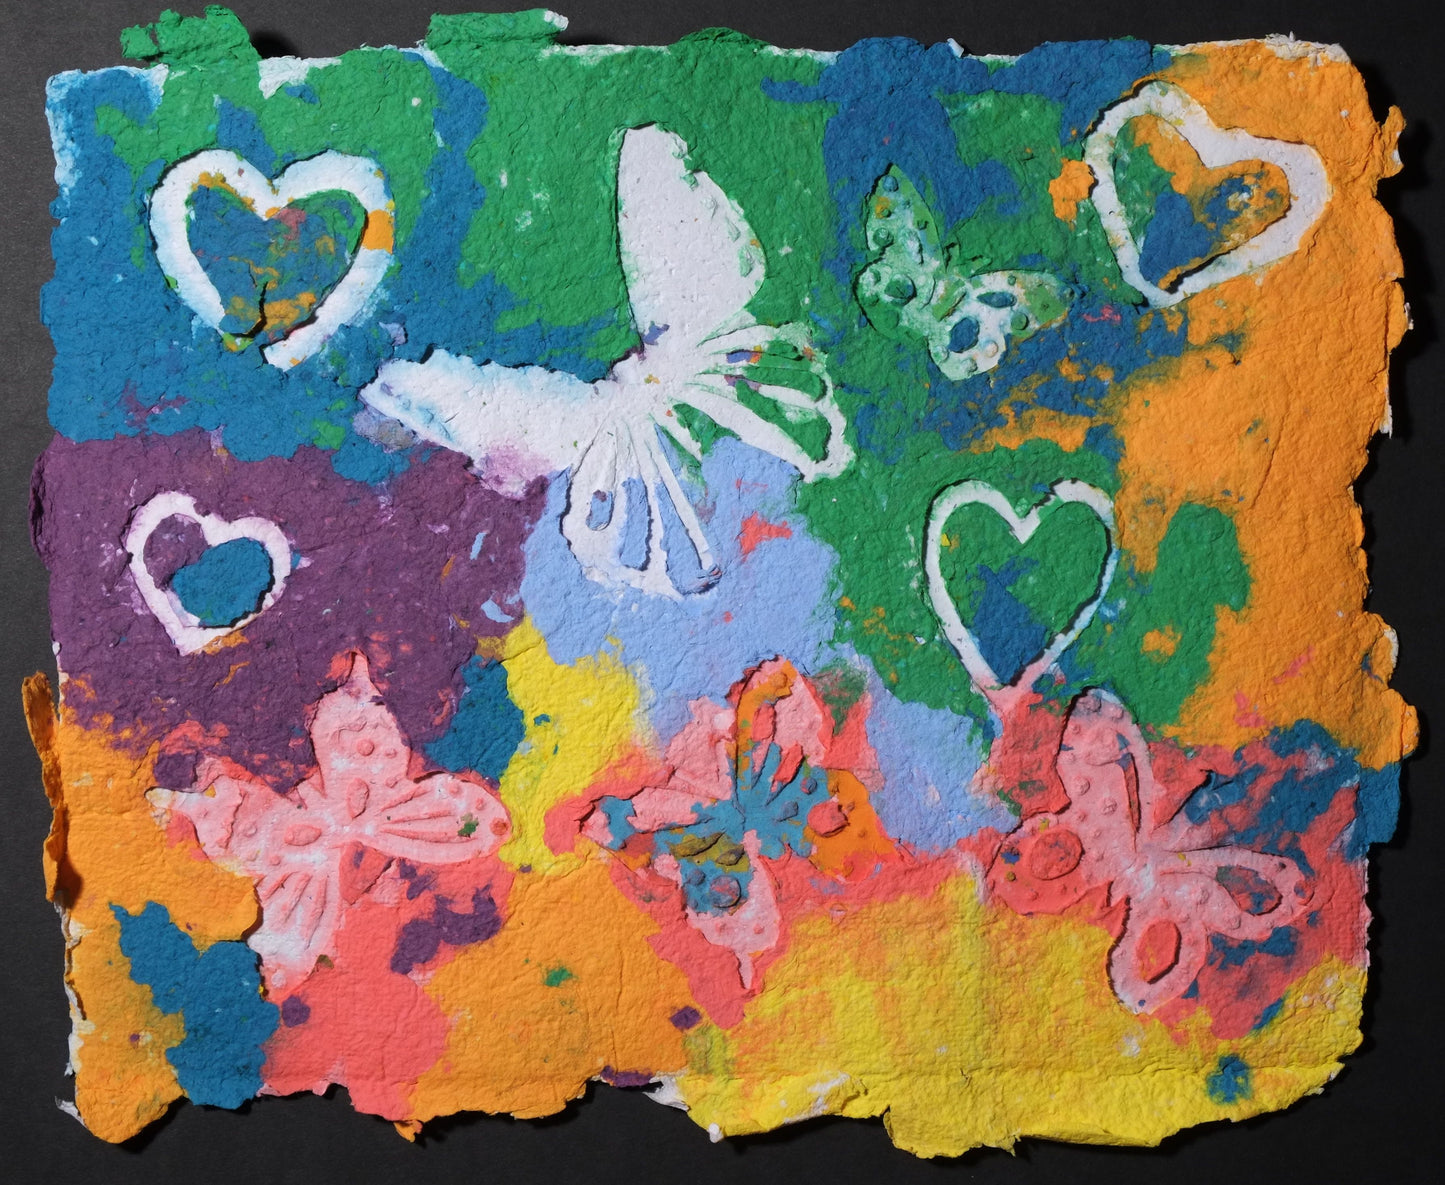 Highly textured handmade paper with white embossed butterflies and hearts against brightly colored oranges, greens, reds, and purple.